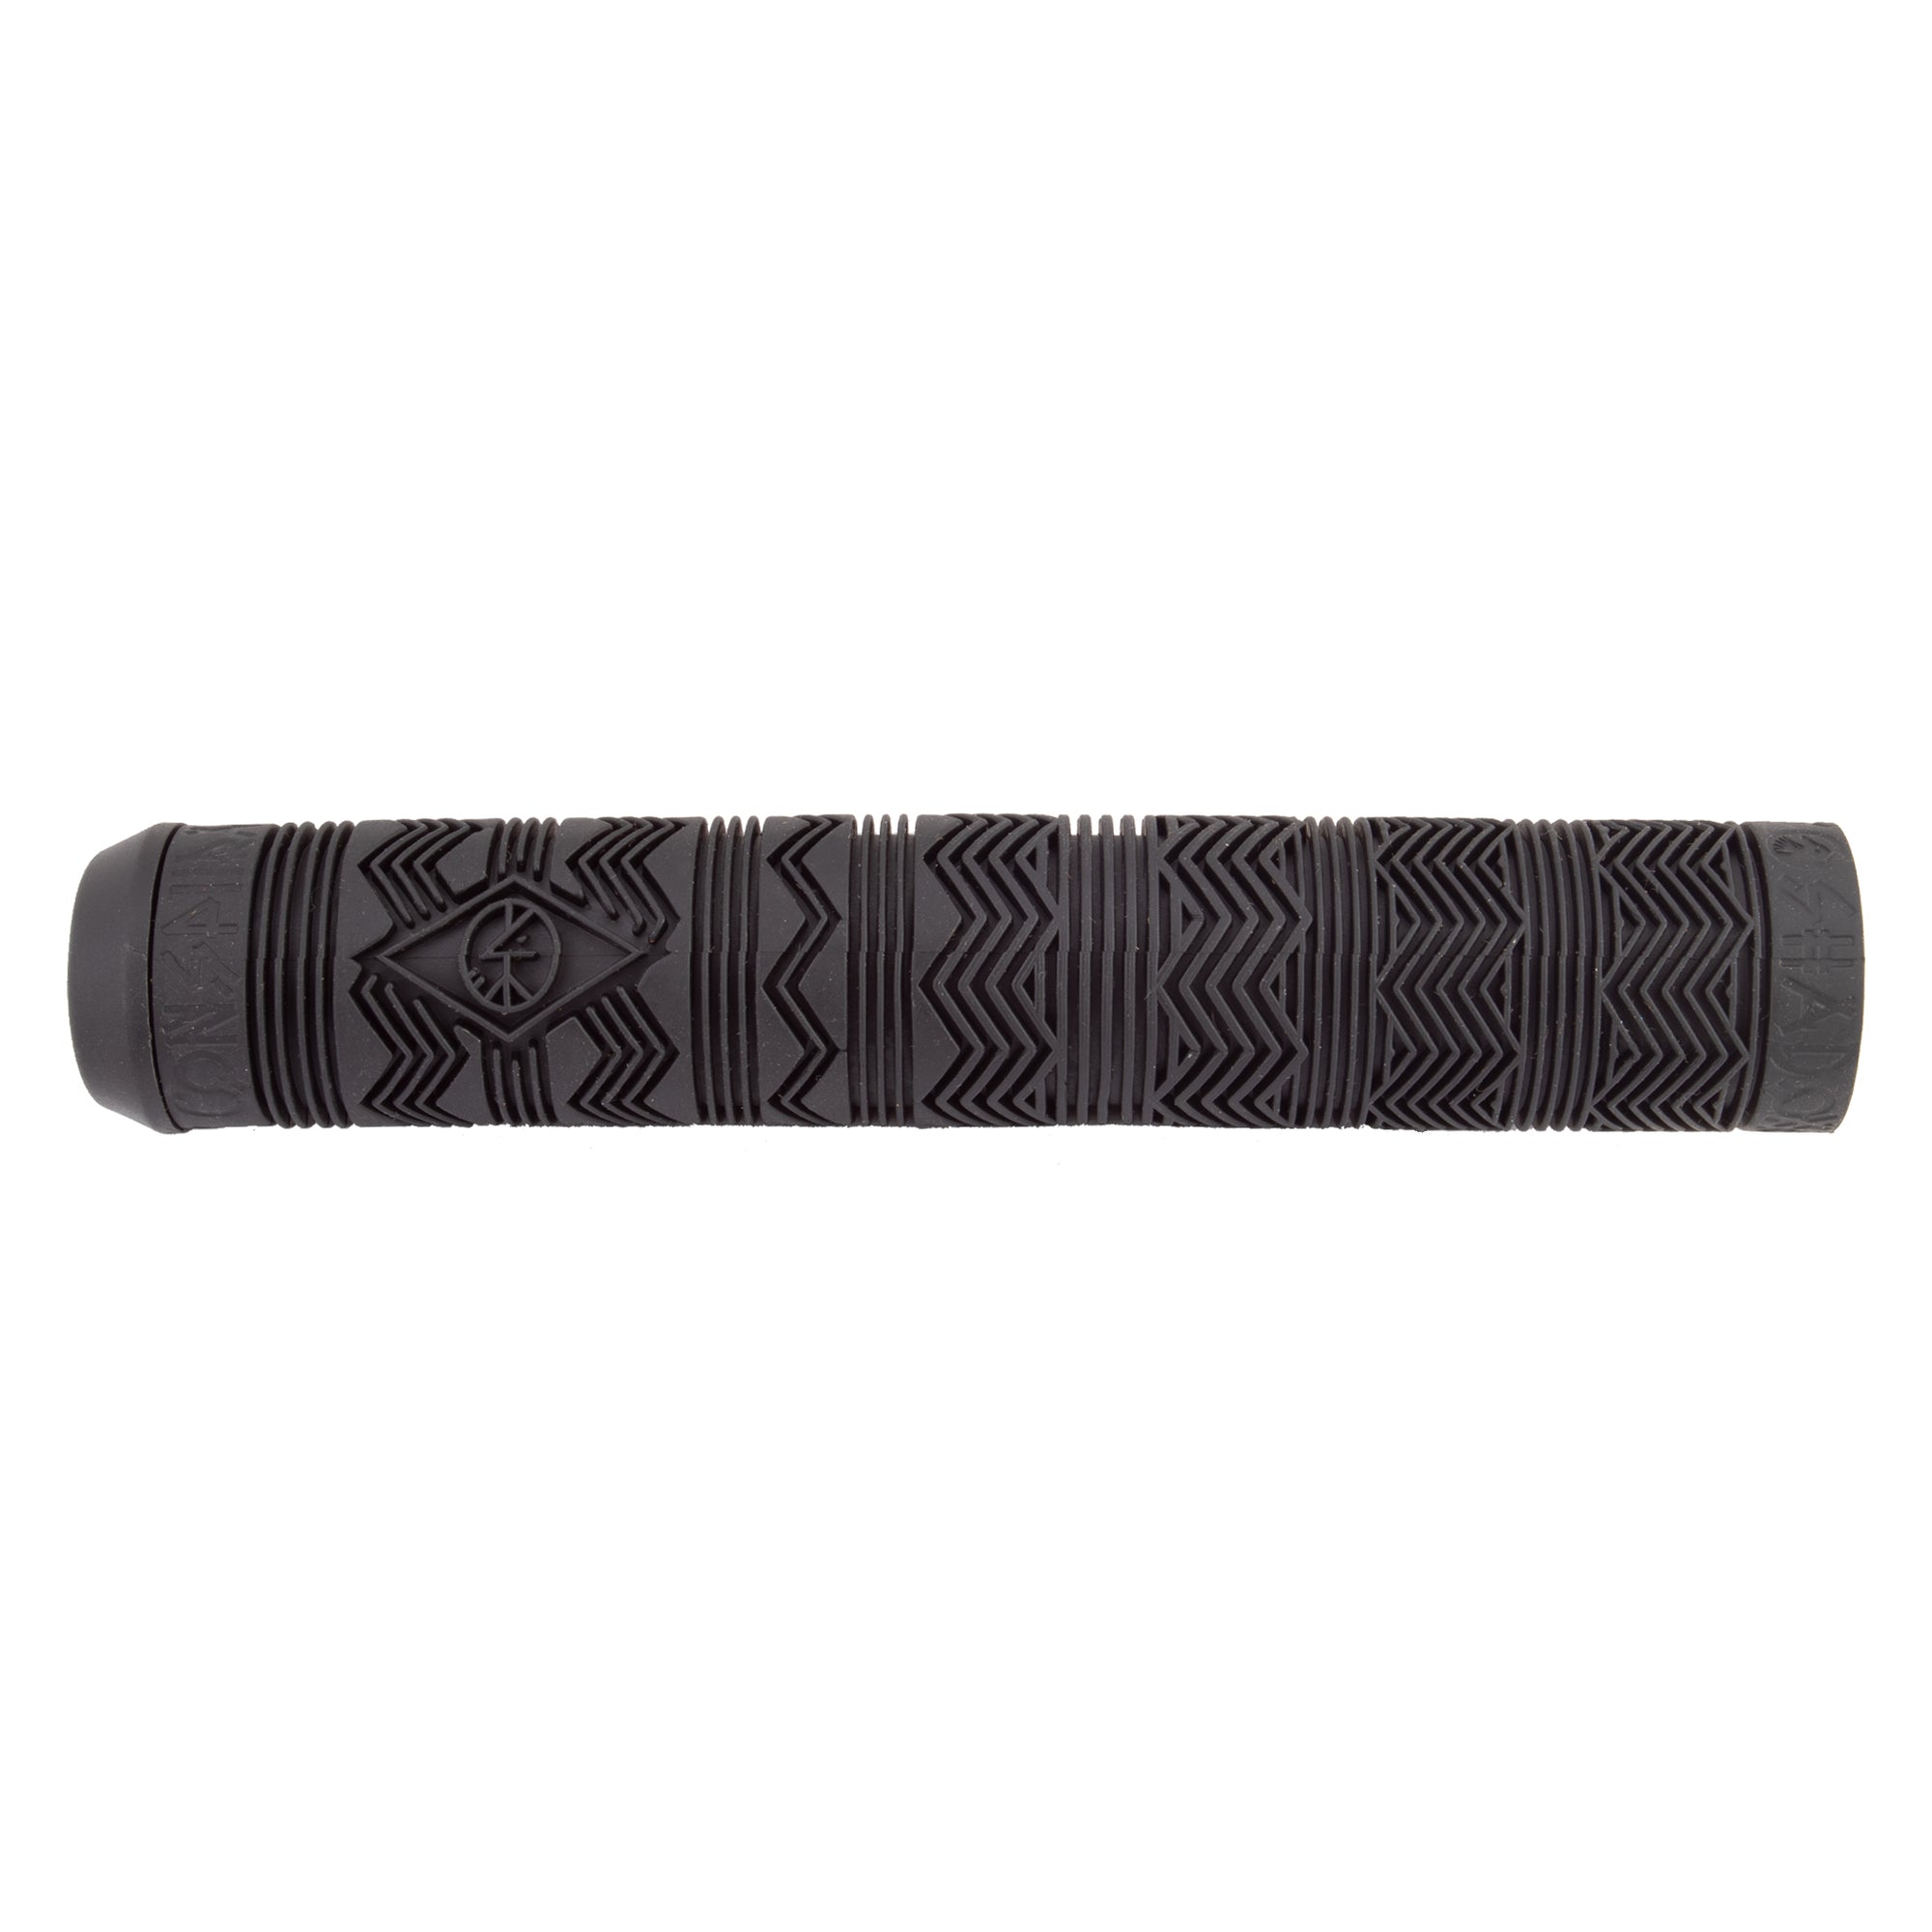 The Shadow Conspiracy Gipsy DCR Grip - Black - Downtown Bicycle Works 